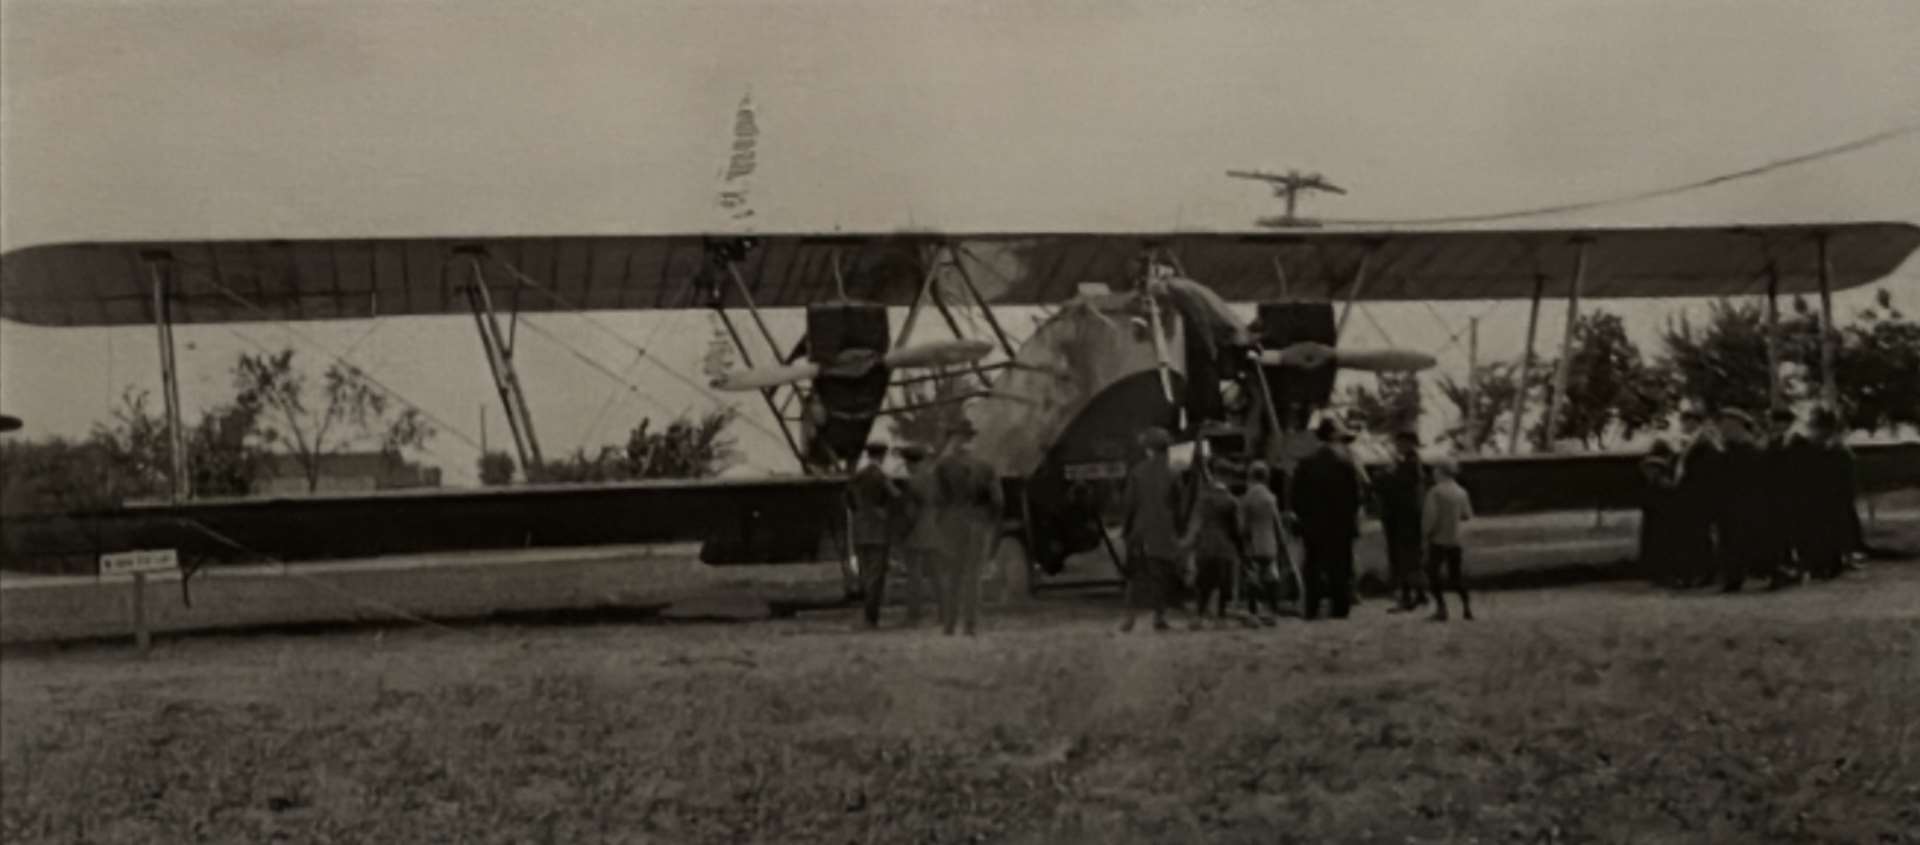 1919 National Matches aircraft competition